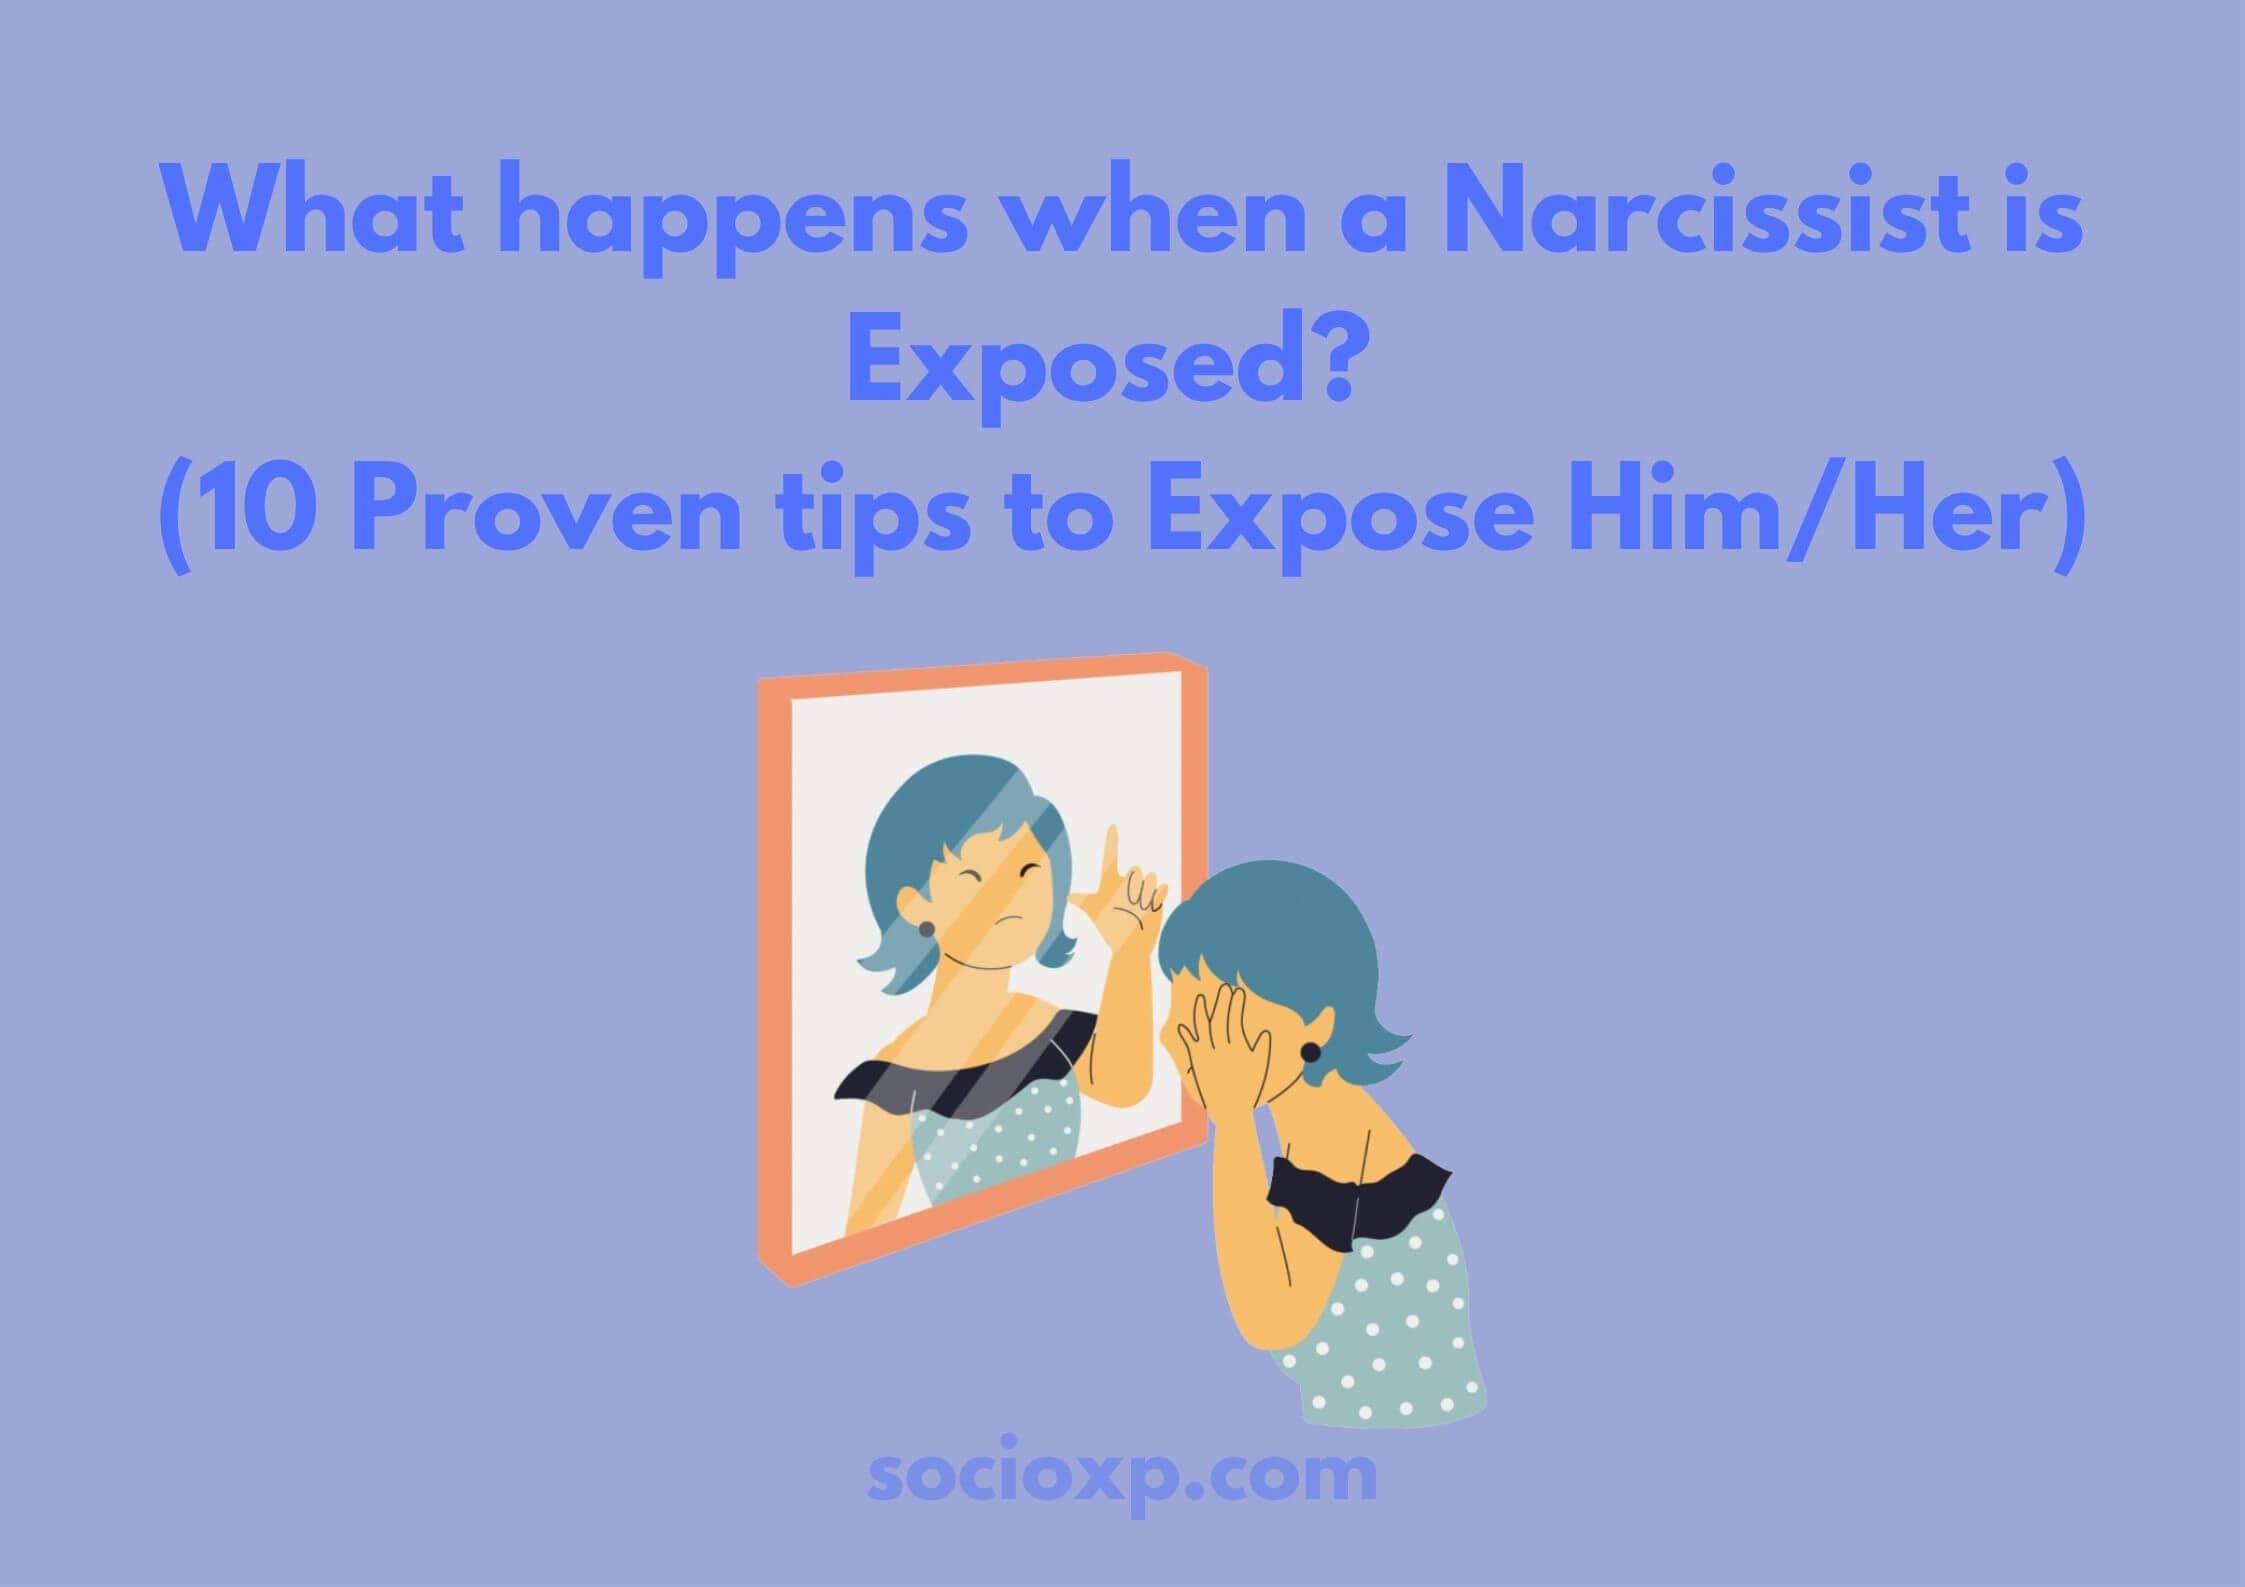 What Happens When a Narcissist Is Exposed? (10 Proven tips to Expose Him/Her)